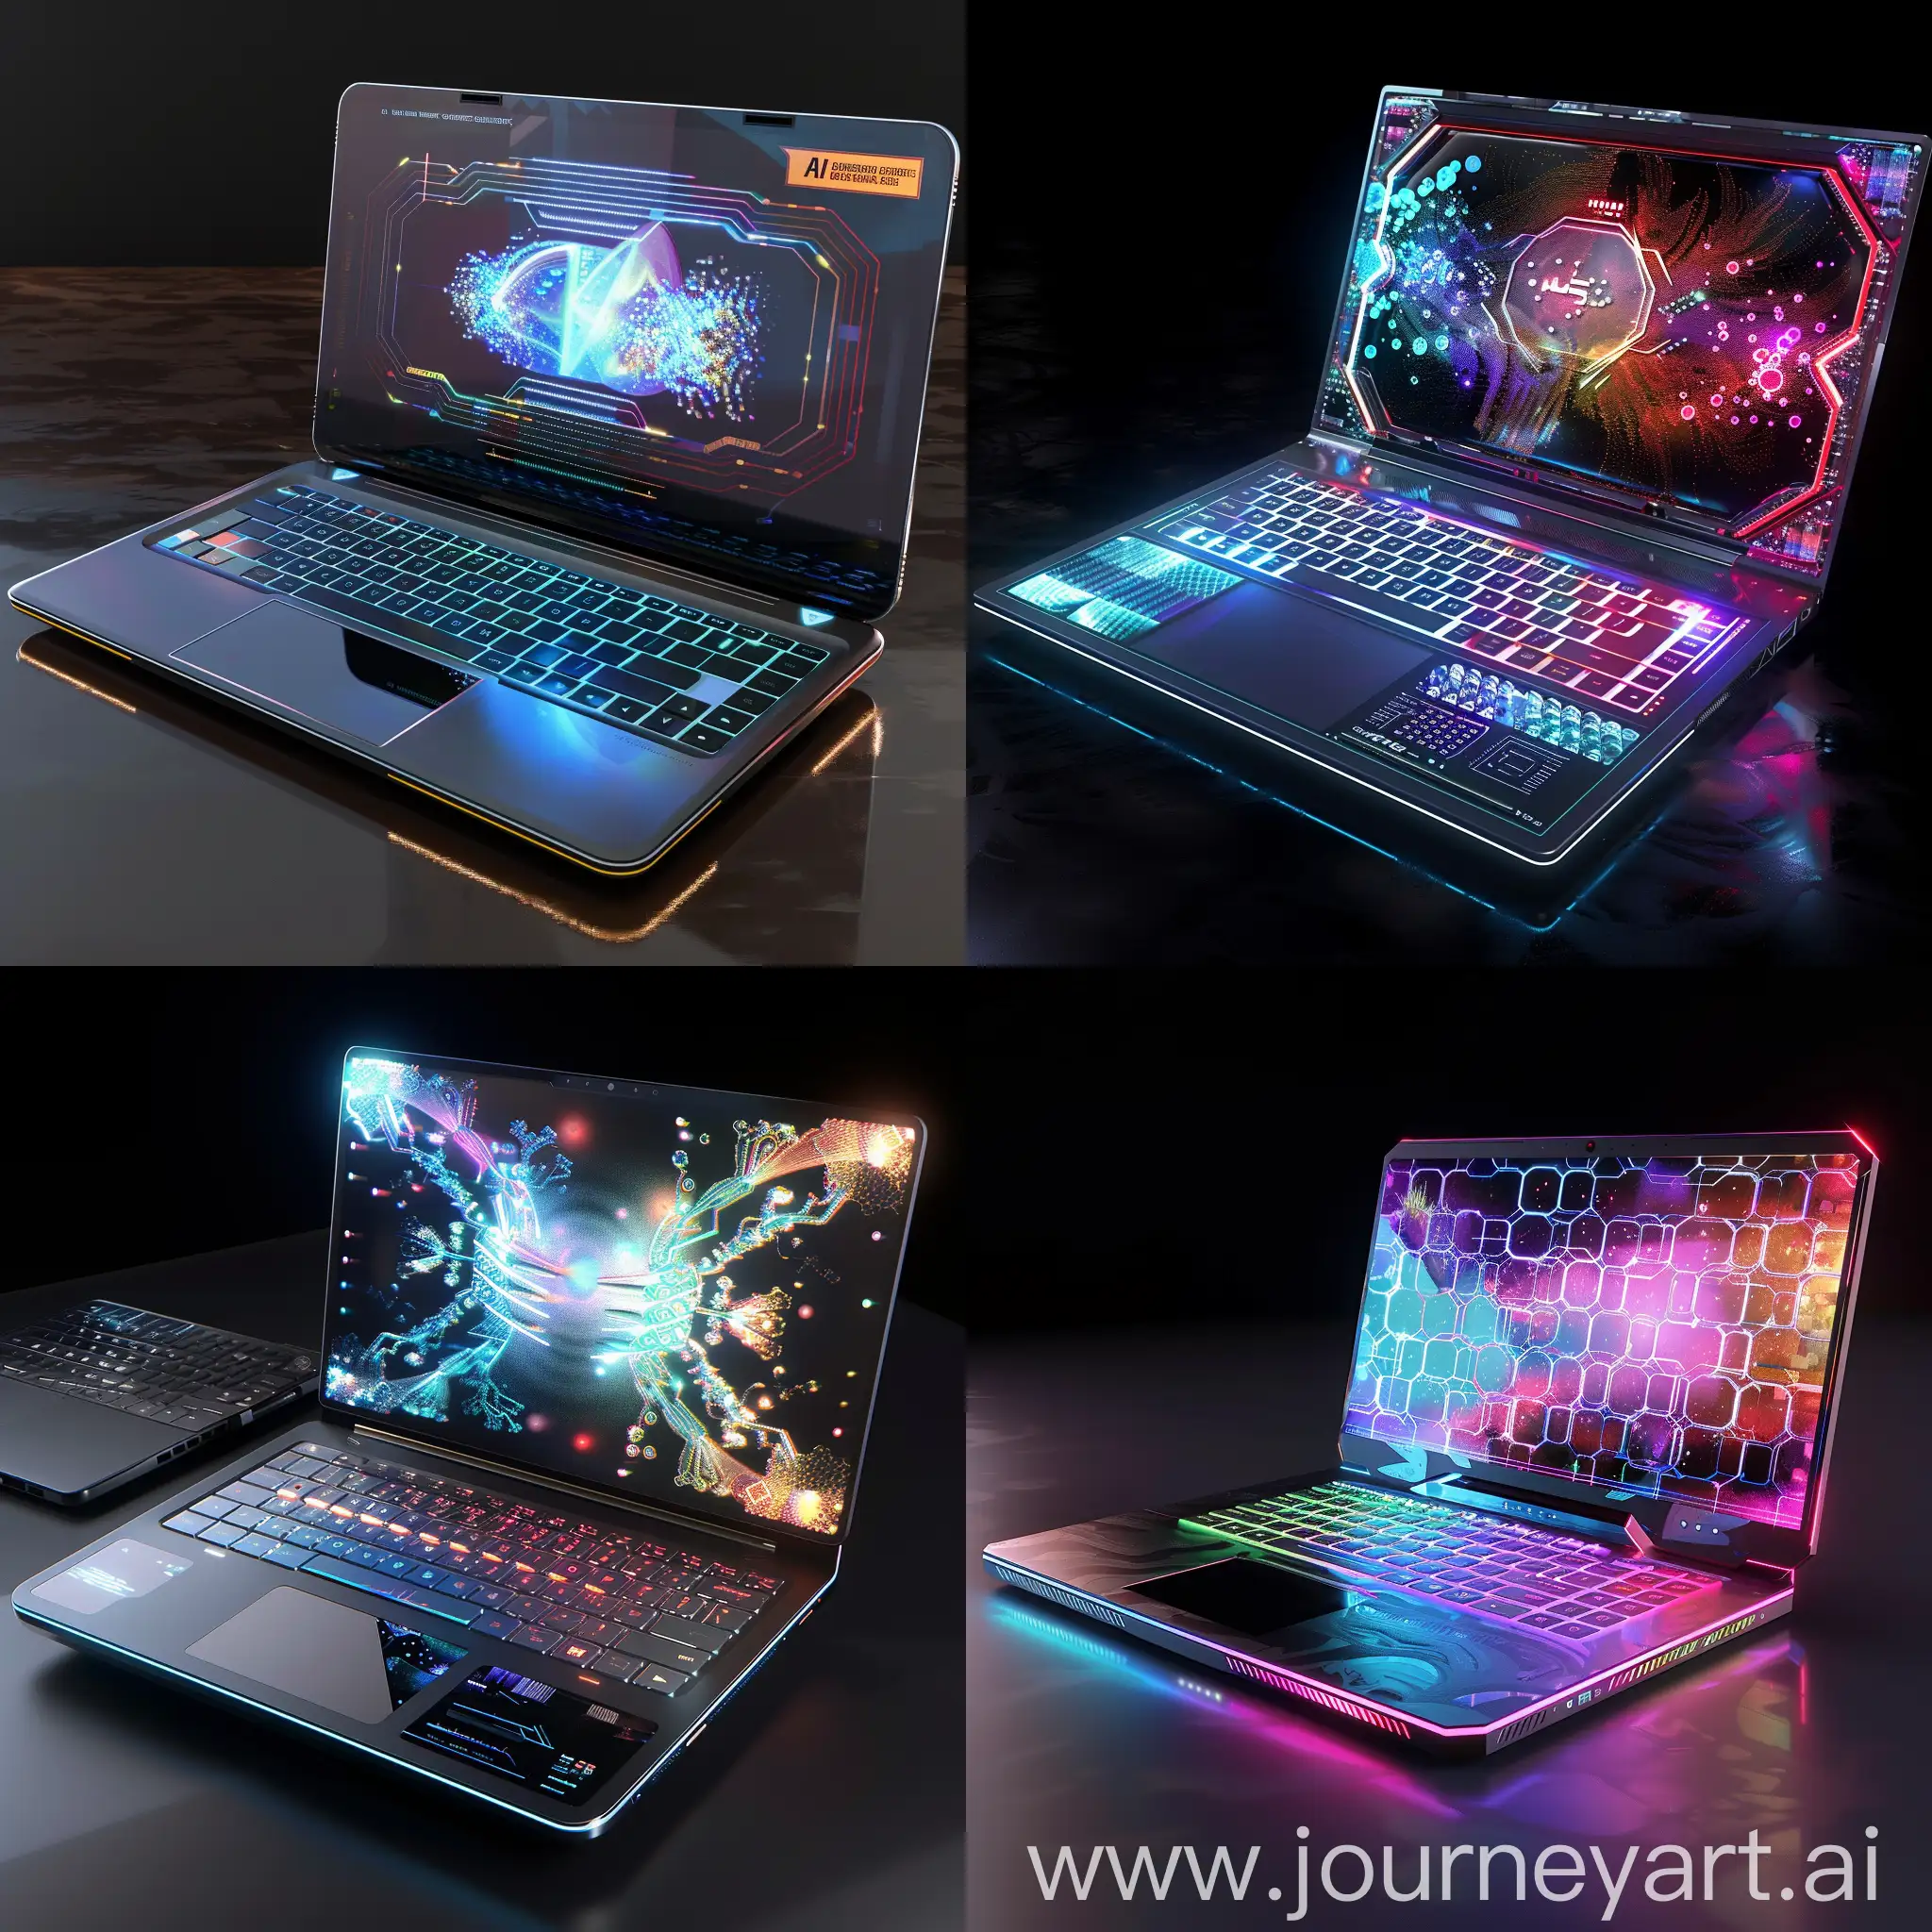 Futuristic-HighTech-Laptop-with-Quantumdot-Display-and-Nanomaterial-Innovations